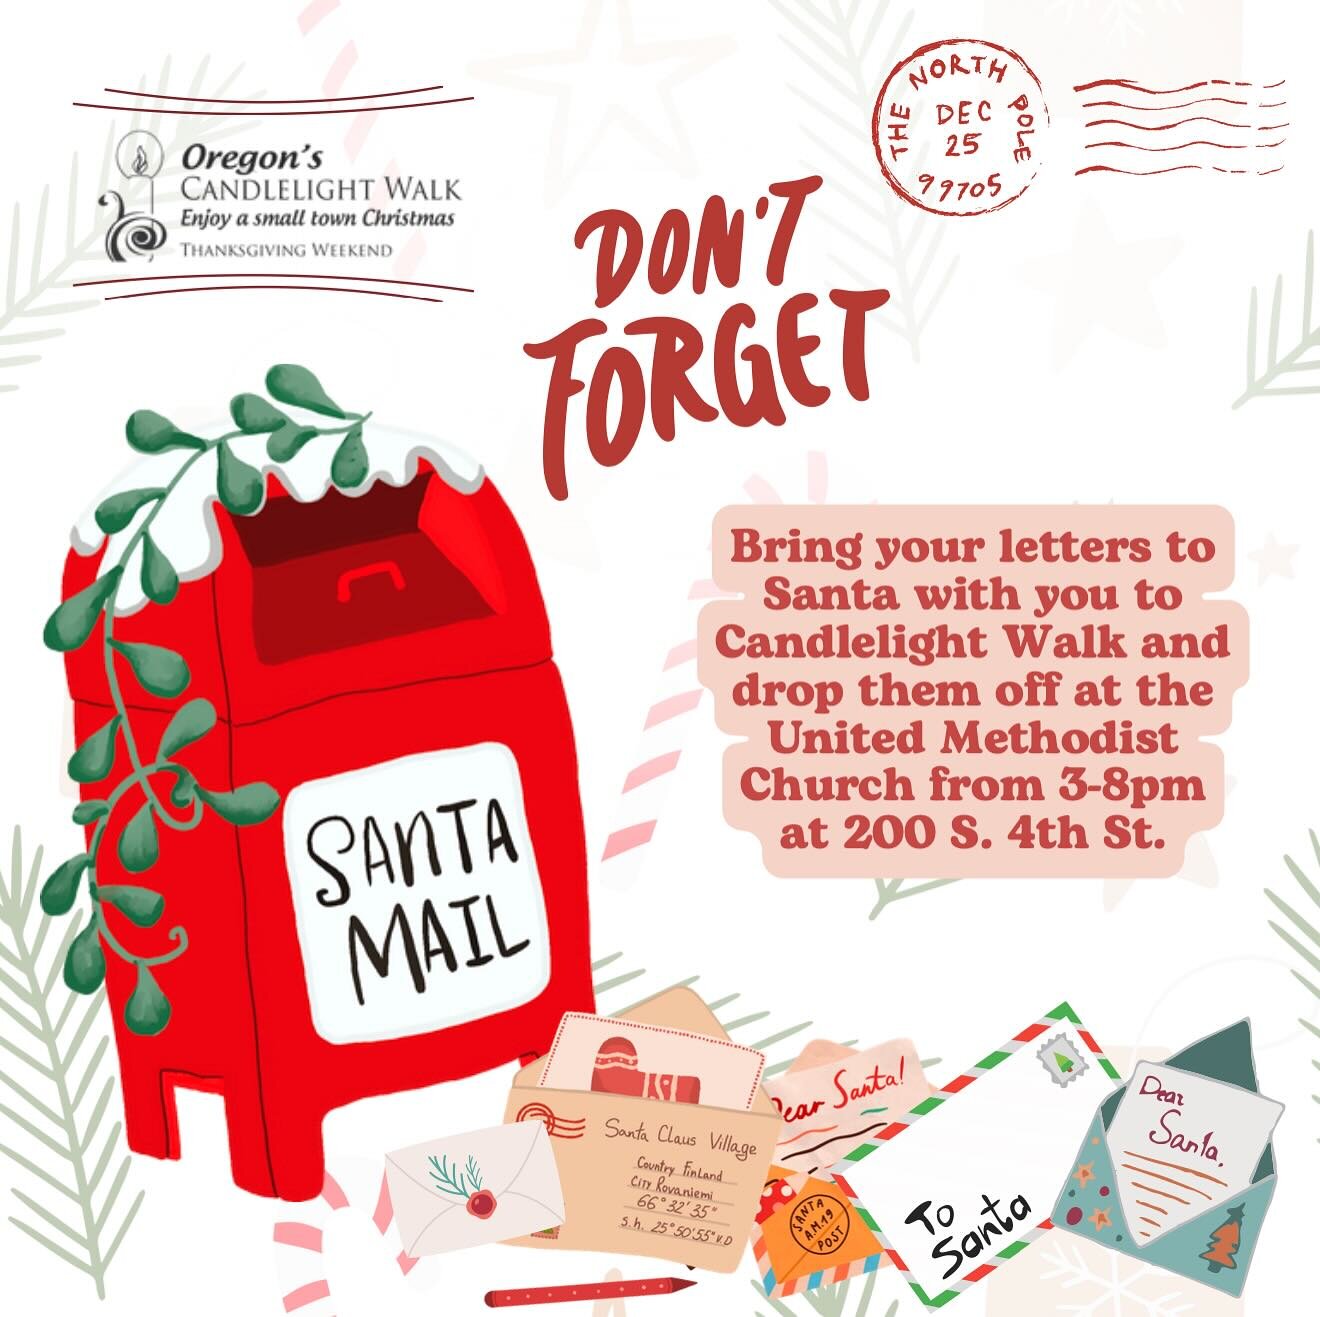 We&rsquo;ll also have a table at the kids zone for everyone to get their letter in to Santa early! 🎄🎅🏼